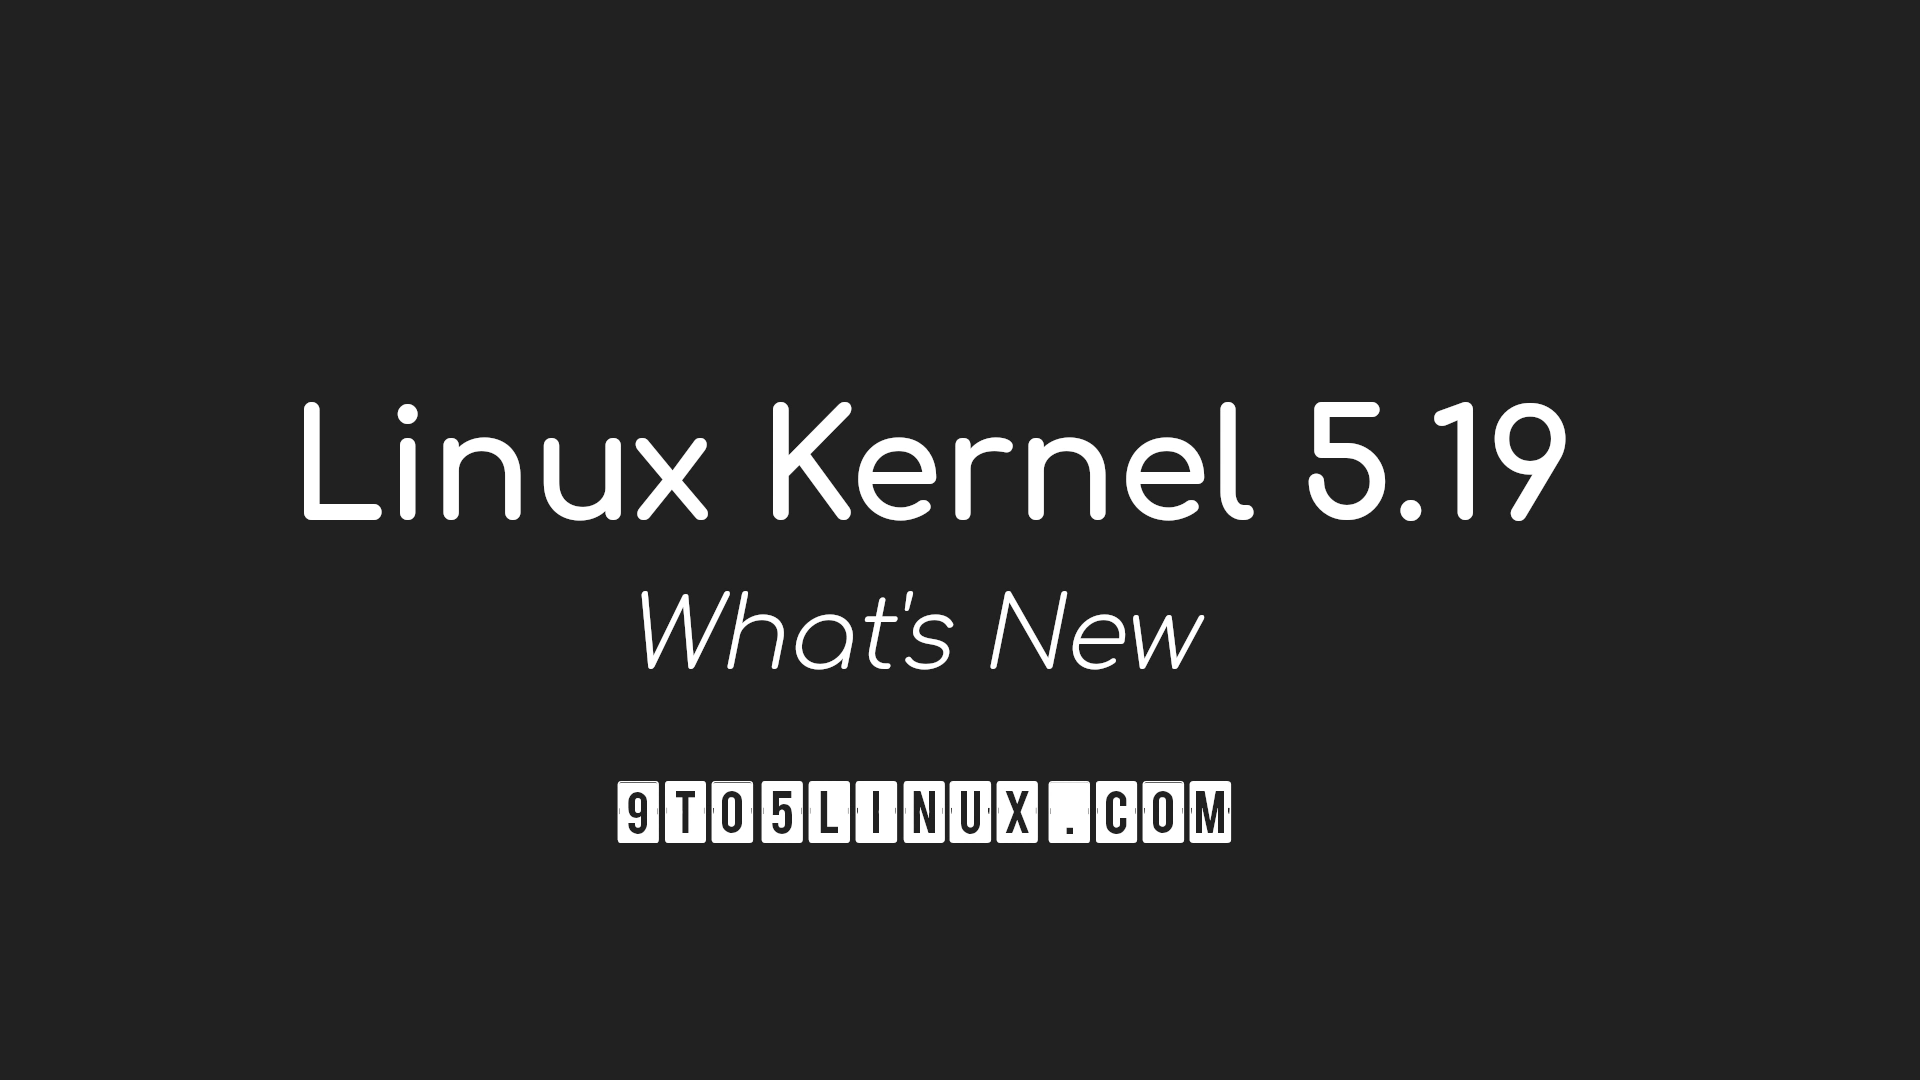 Linux Kernel 5.19 Officially Released, Linus Torvalds Teases Linux 6.0 as Next Kernel Series